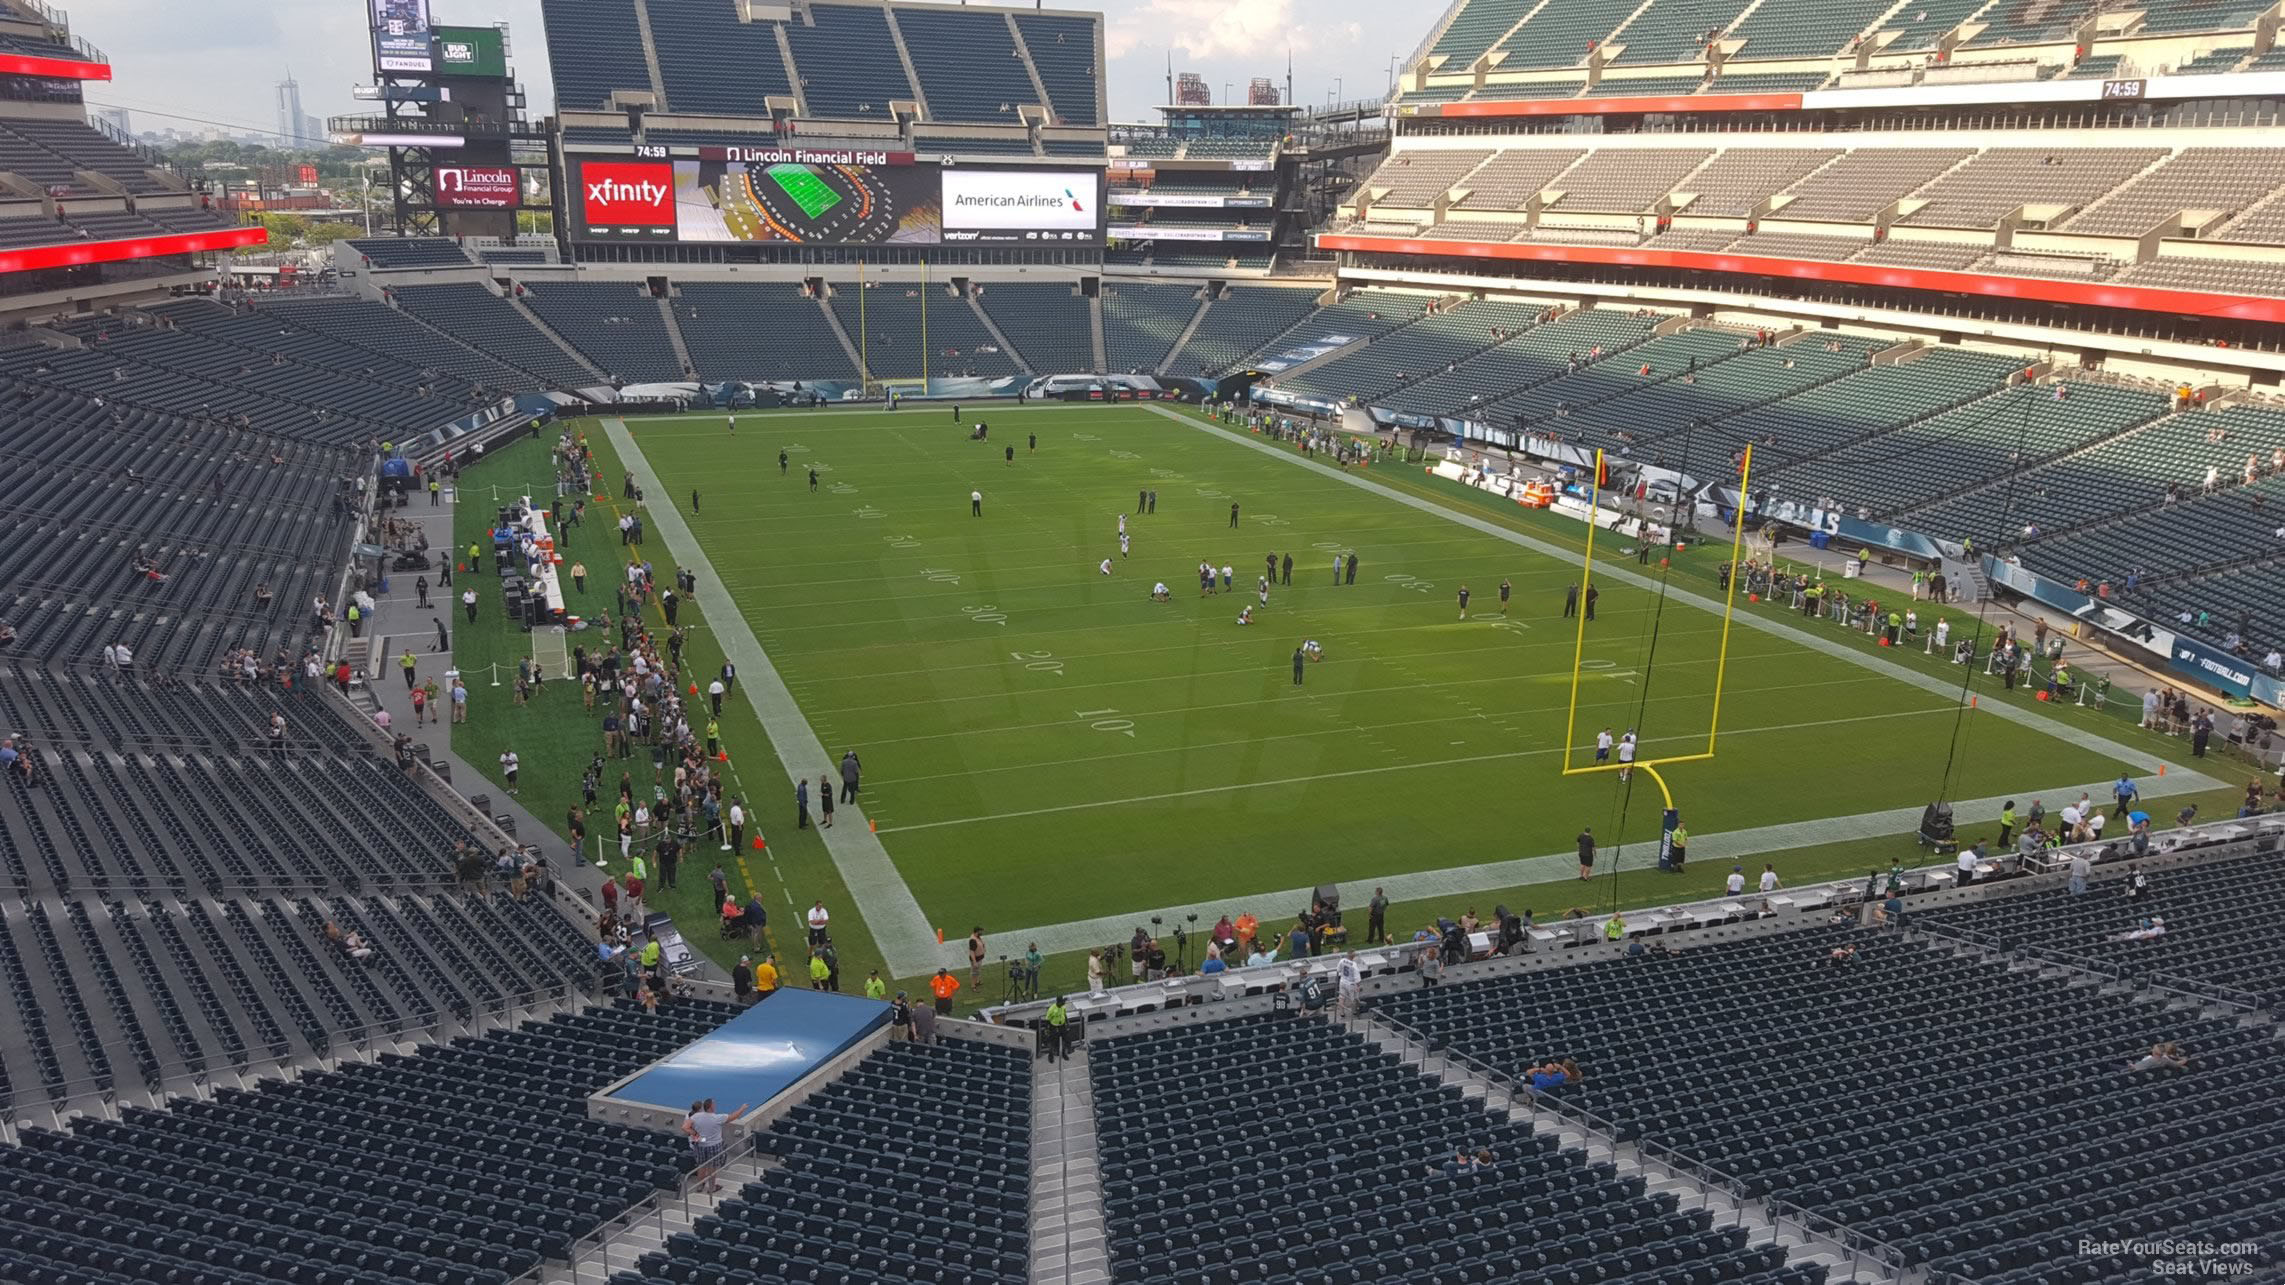 section m9, row 13 seat view  for football - lincoln financial field